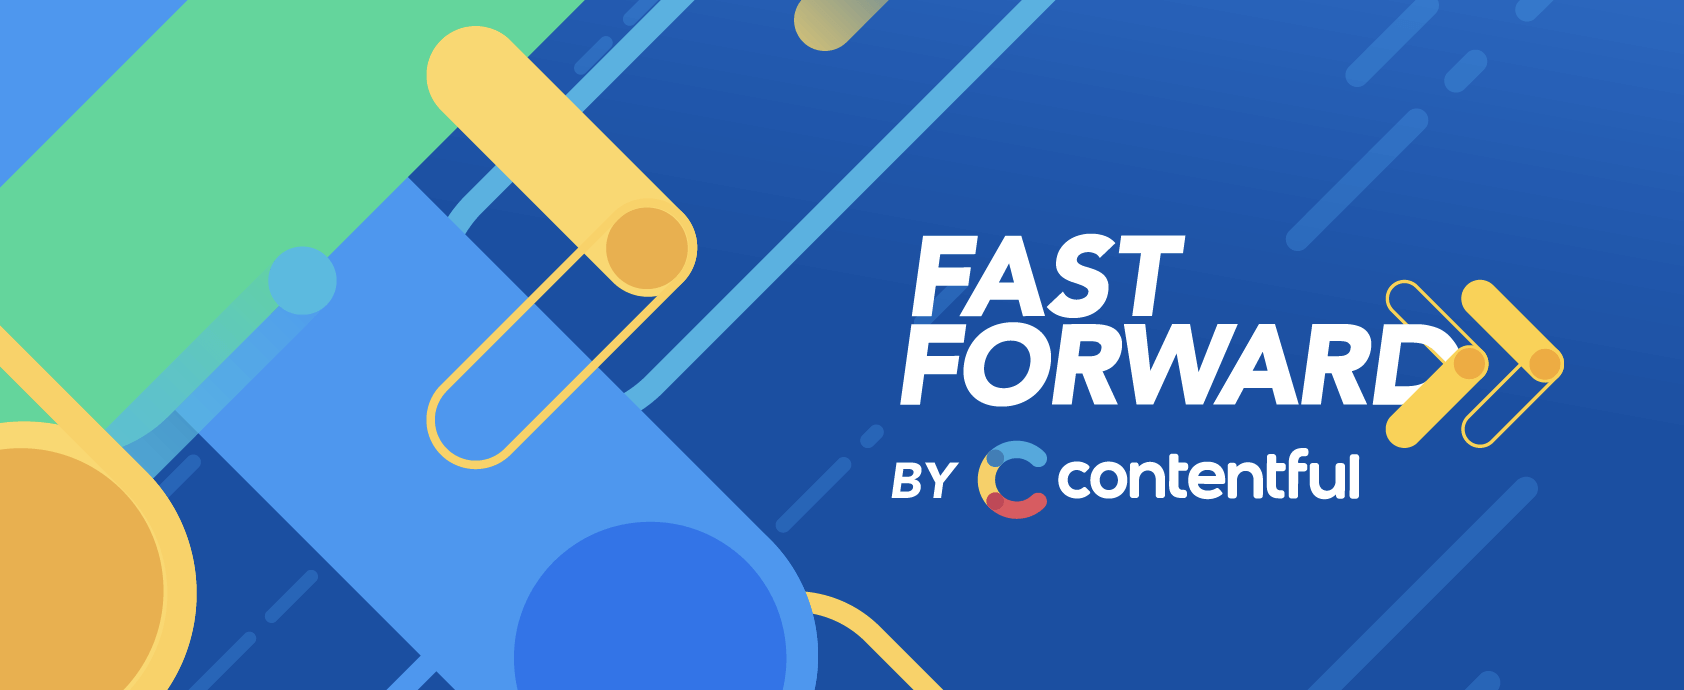 The Contetnful Fast Forward conference banner with abstract graphics